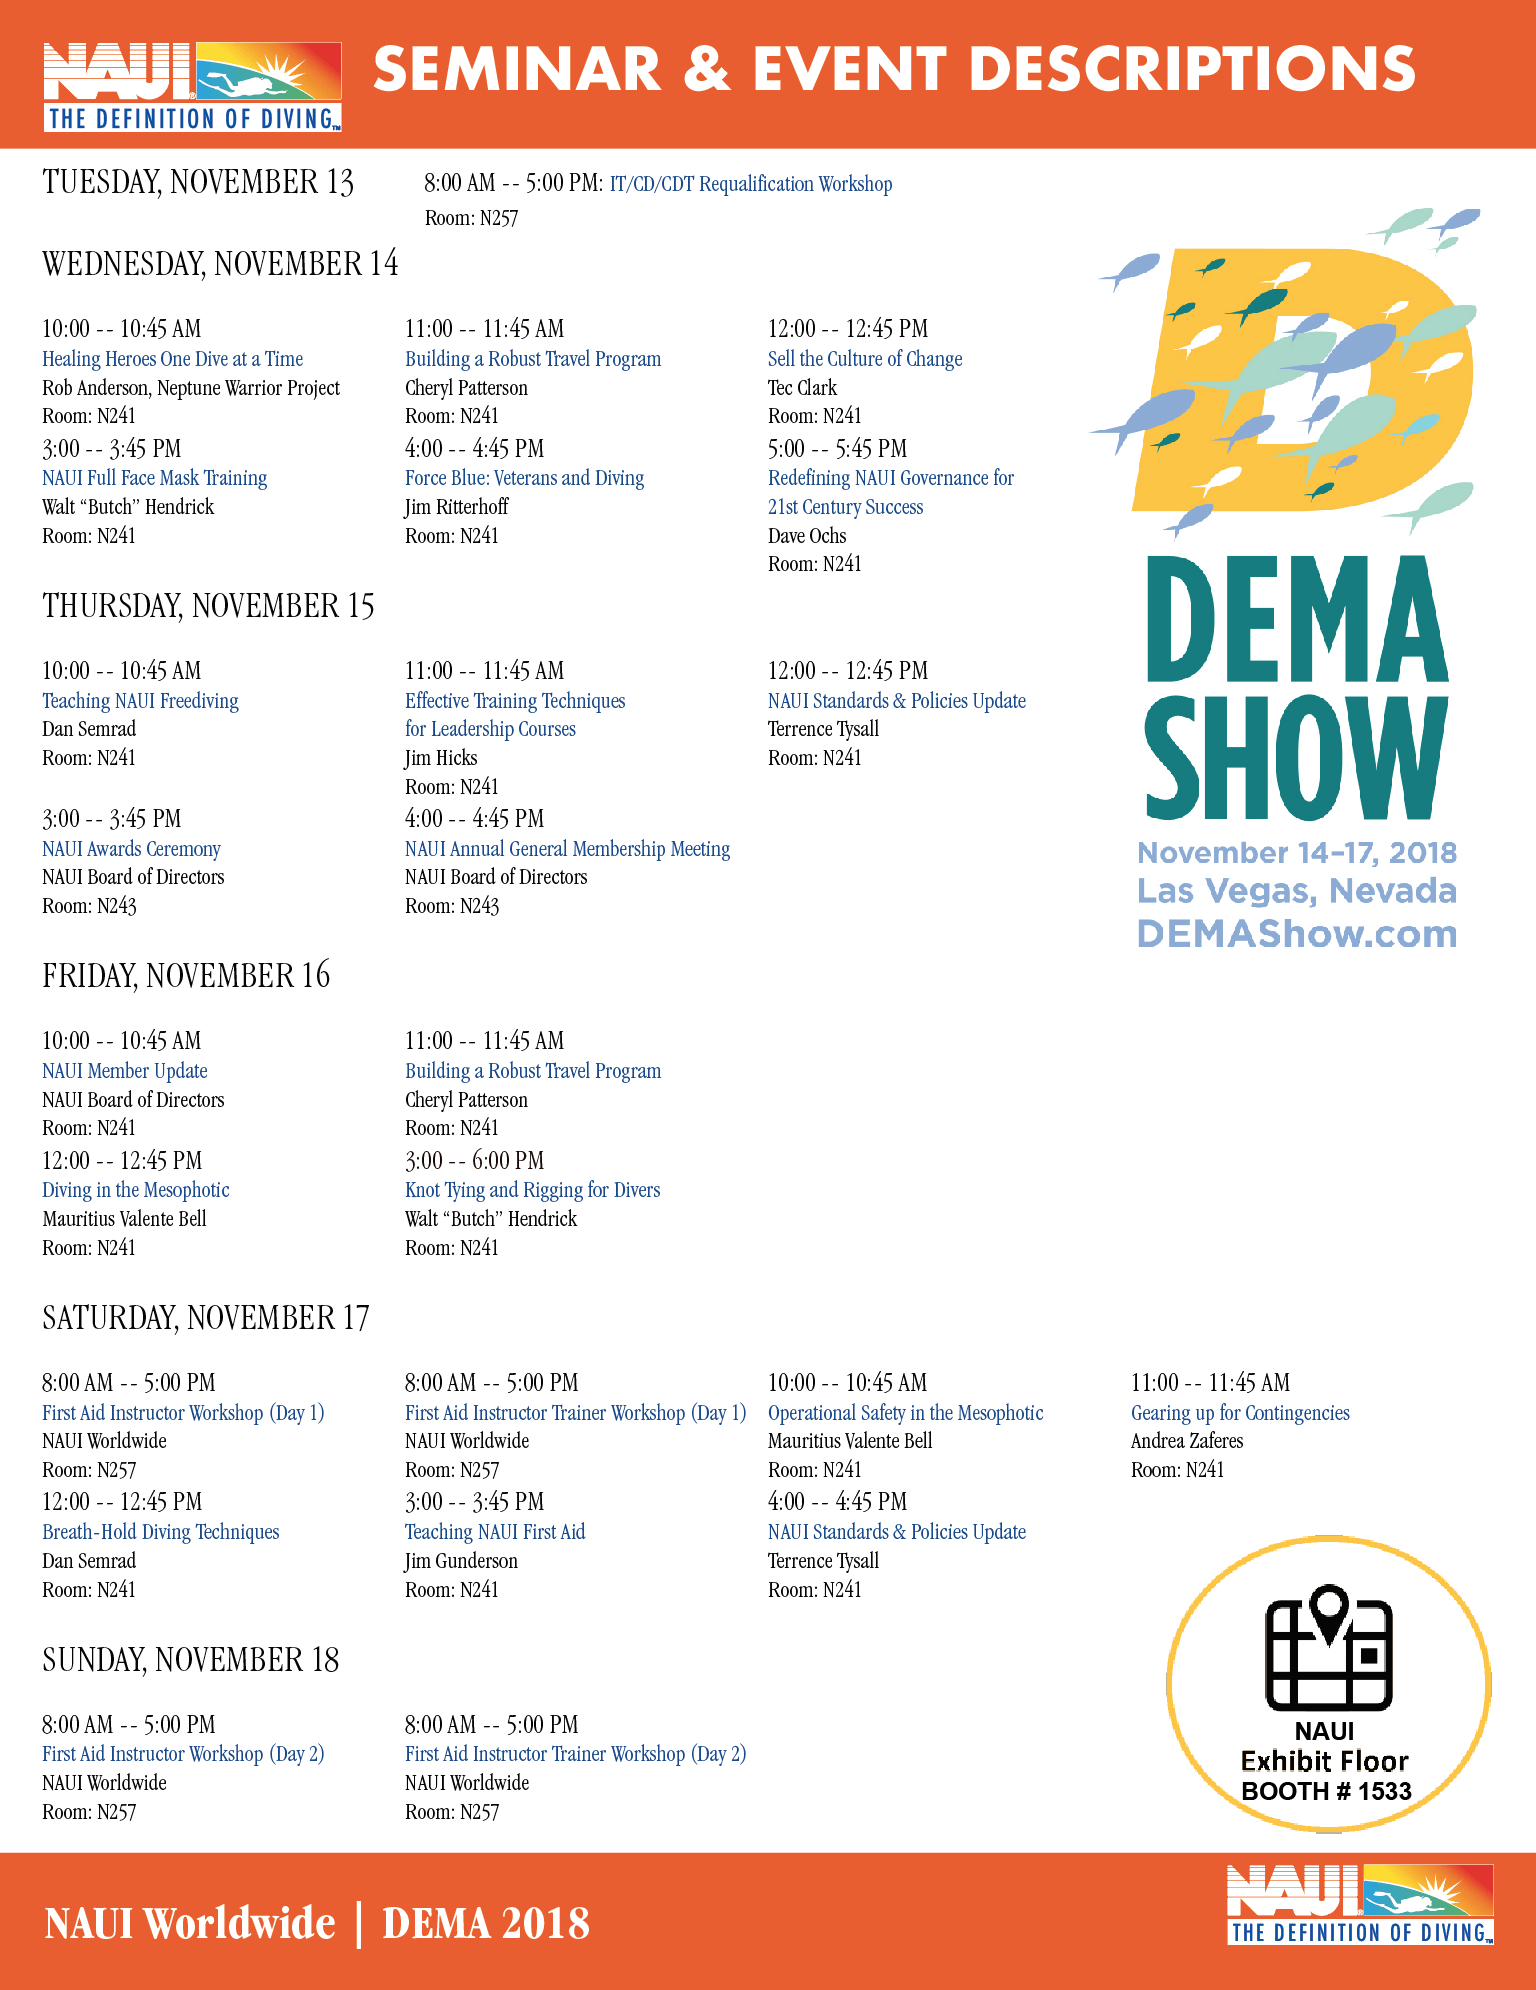 Sched Logo - NAUI Releases Schedule of Events for DEMA Show 2018 | NAUI Worldwide ...